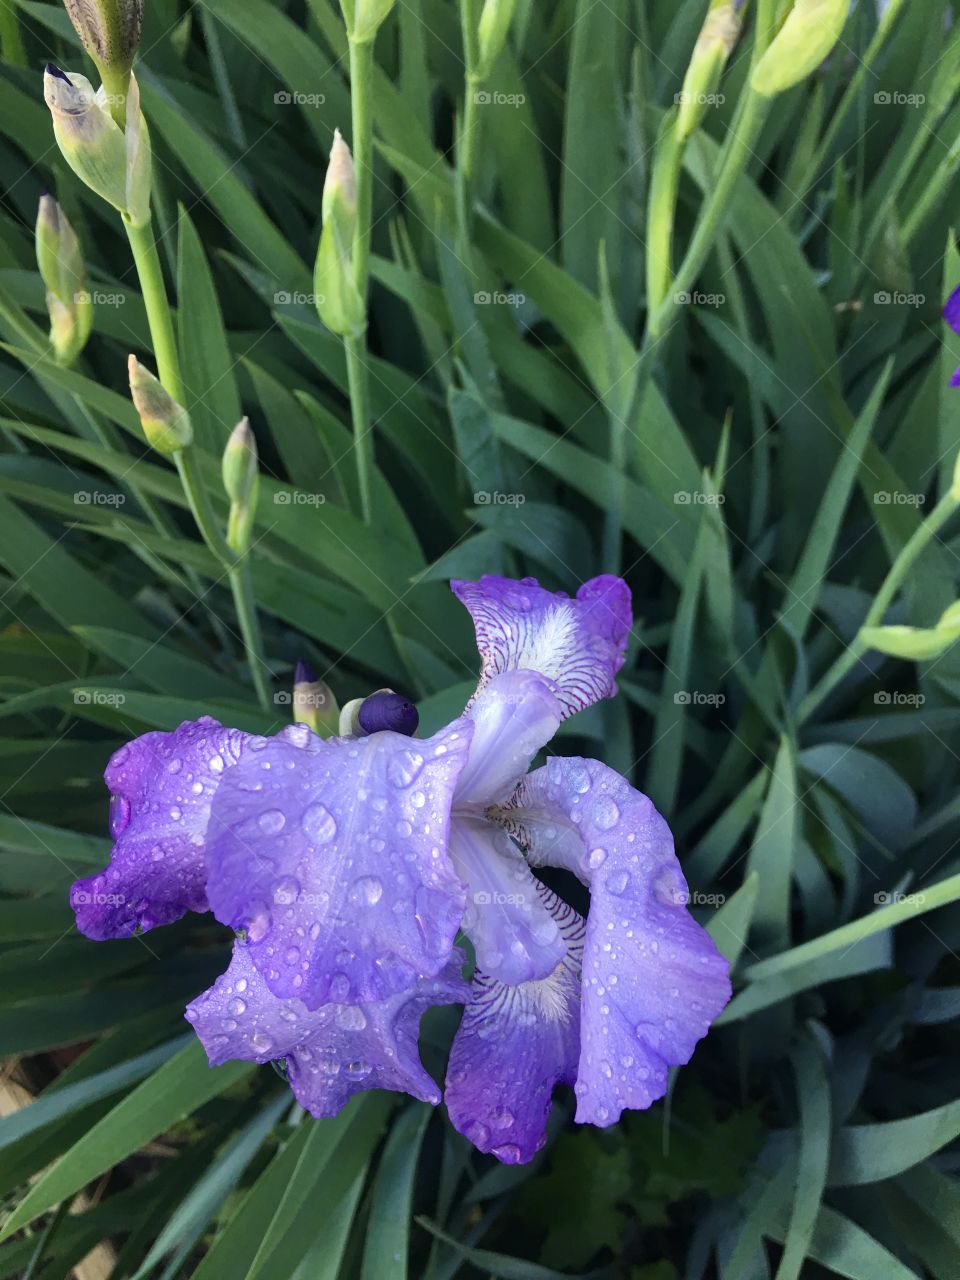 Flower coated with morning dew